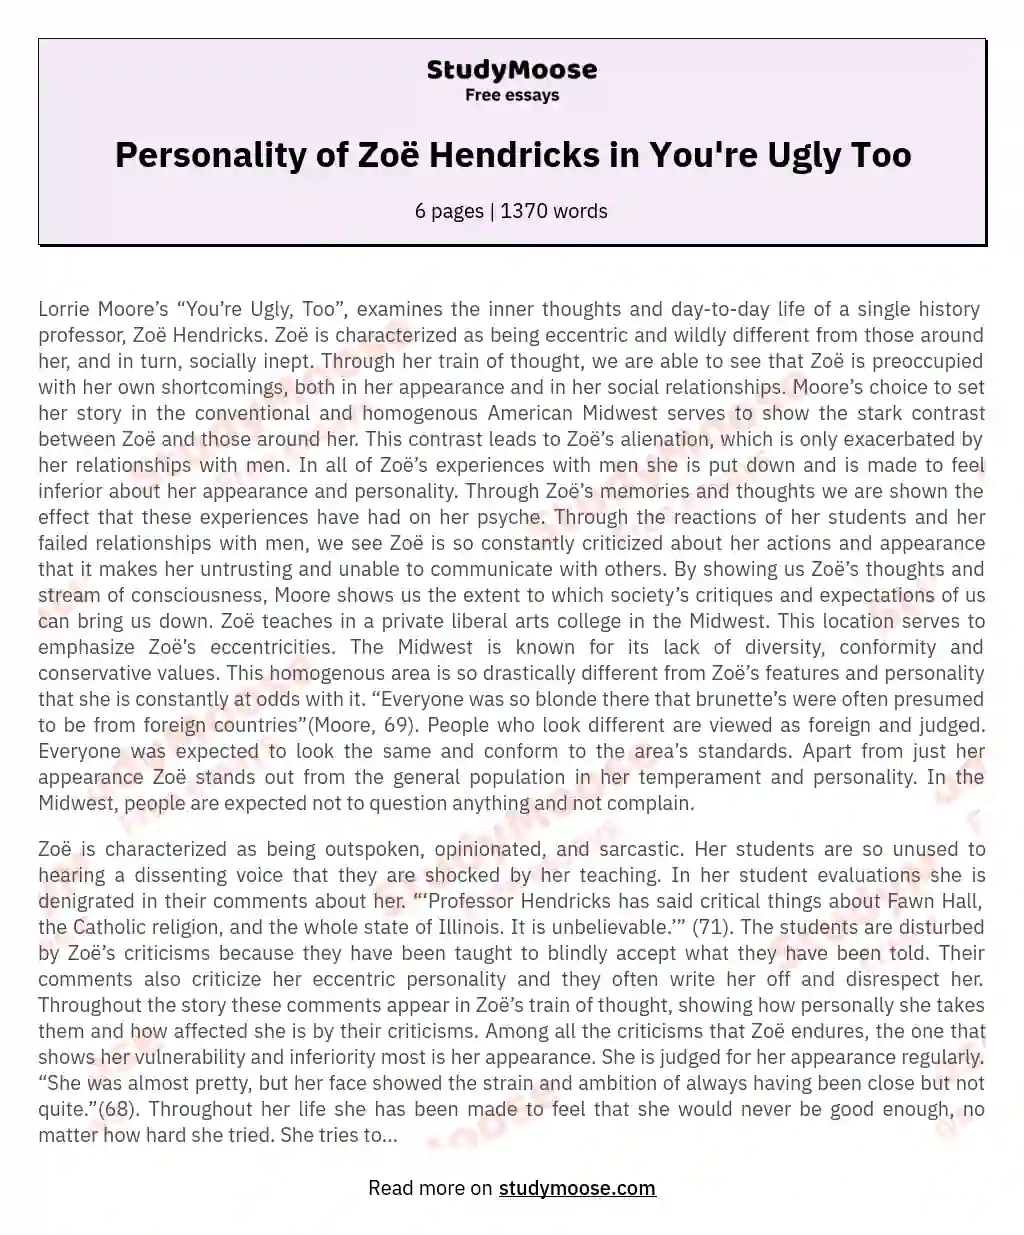 Personality of Zoë Hendricks in You're Ugly Too essay